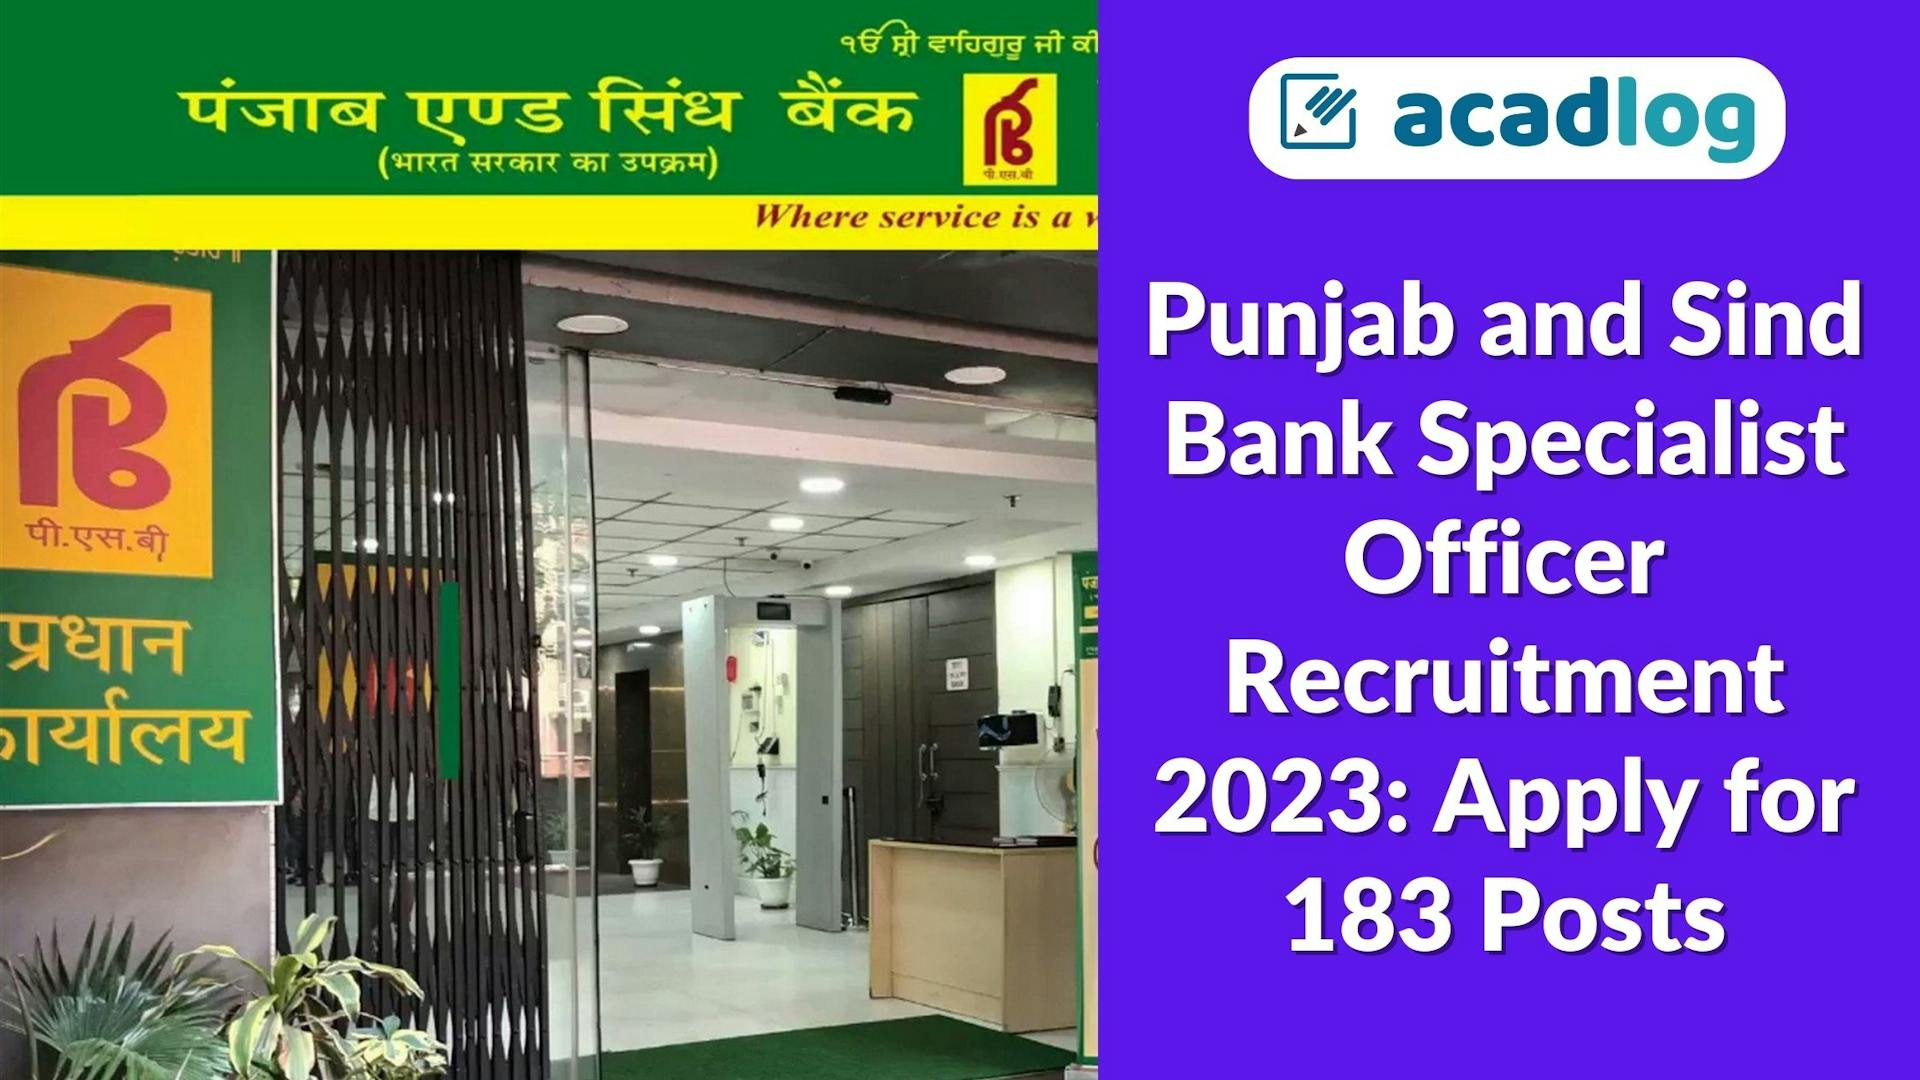 Punjab and Sind Bank Specialist Officer Recruitment 2023: Apply for 183 Posts